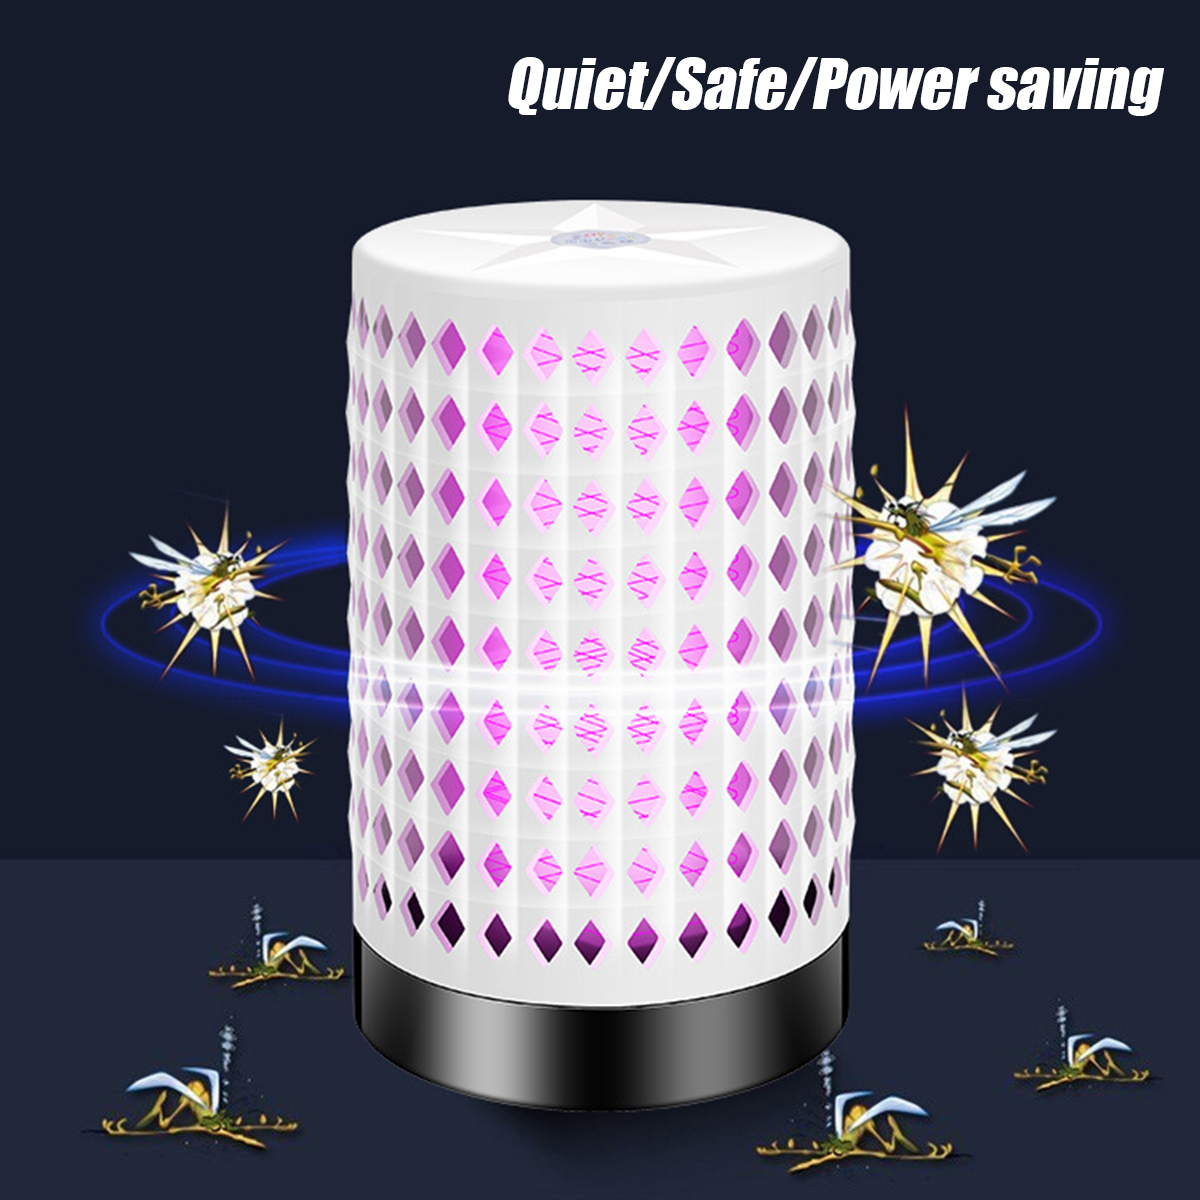 USB-Electric-Shock-Type-Mosquito-Killer-Lamp-LED-Light-Trap-Fly-Bug-Pest-Insect-Zapper-1487573-6